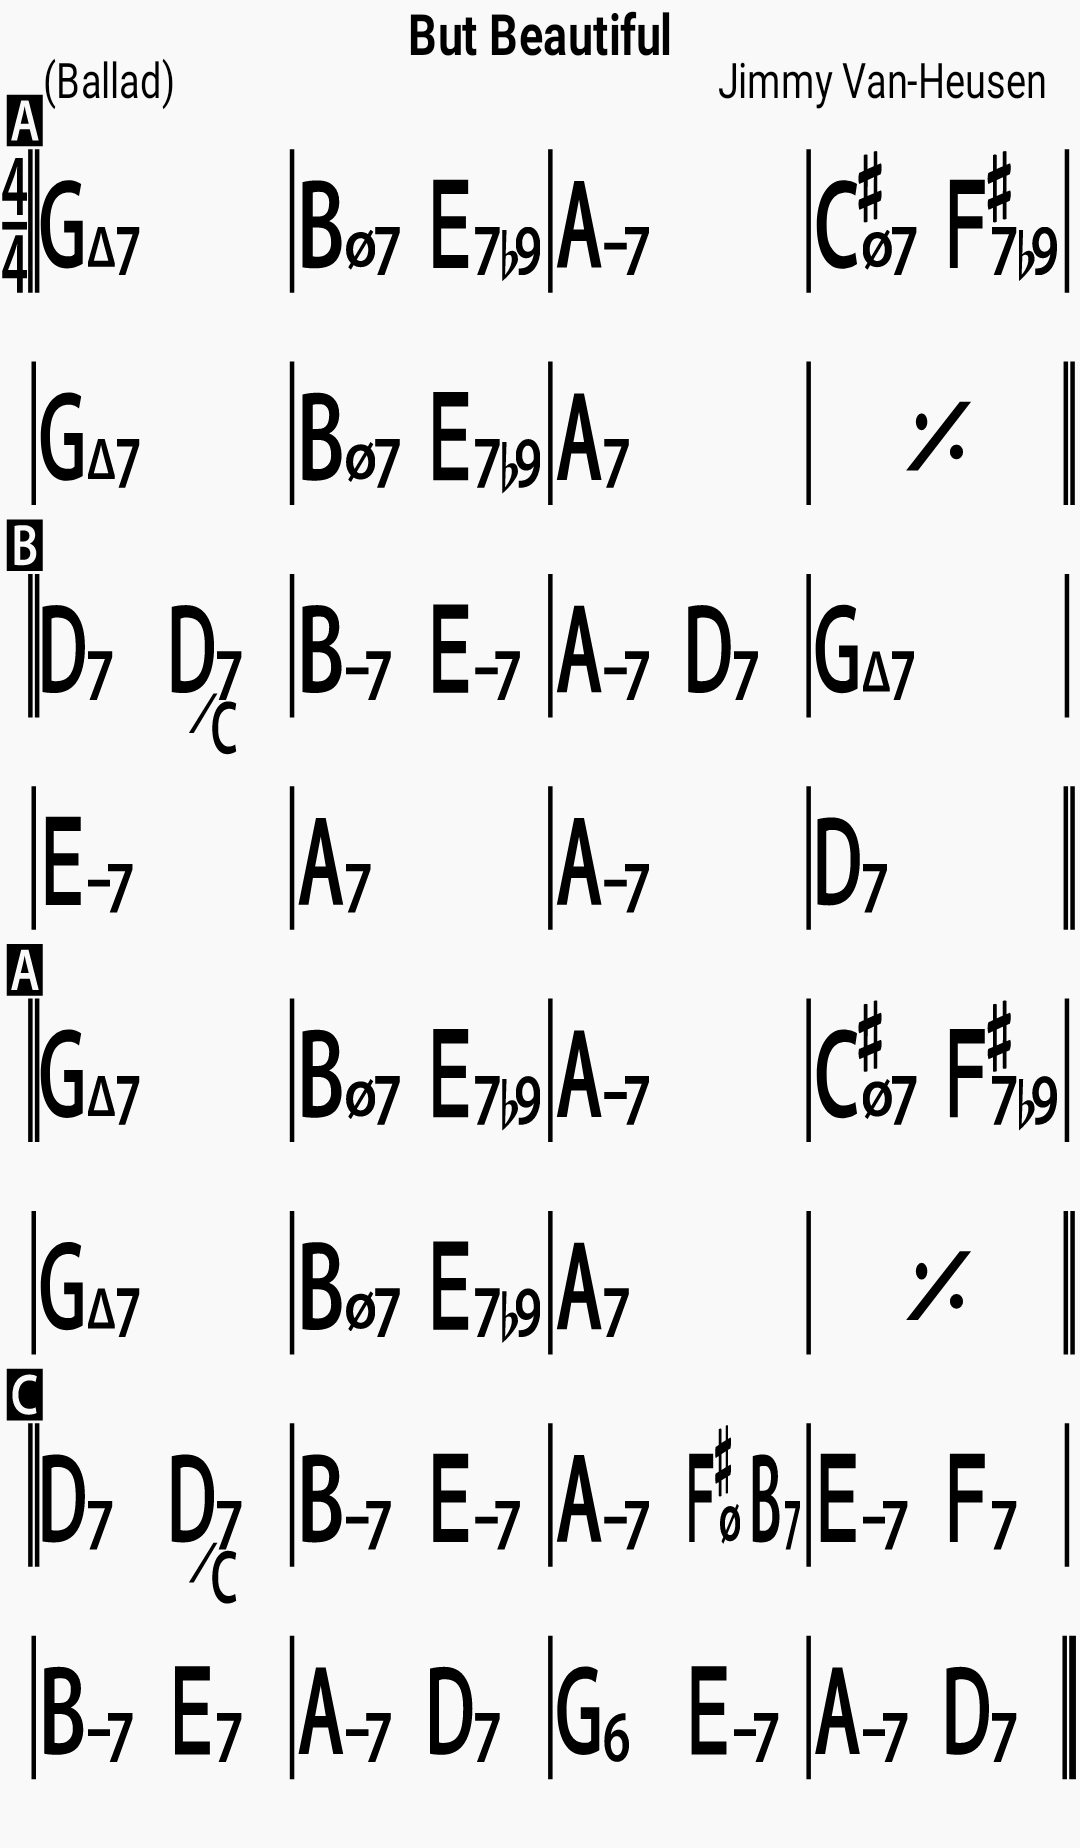 Chord chart for the jazz standard But Beautiful